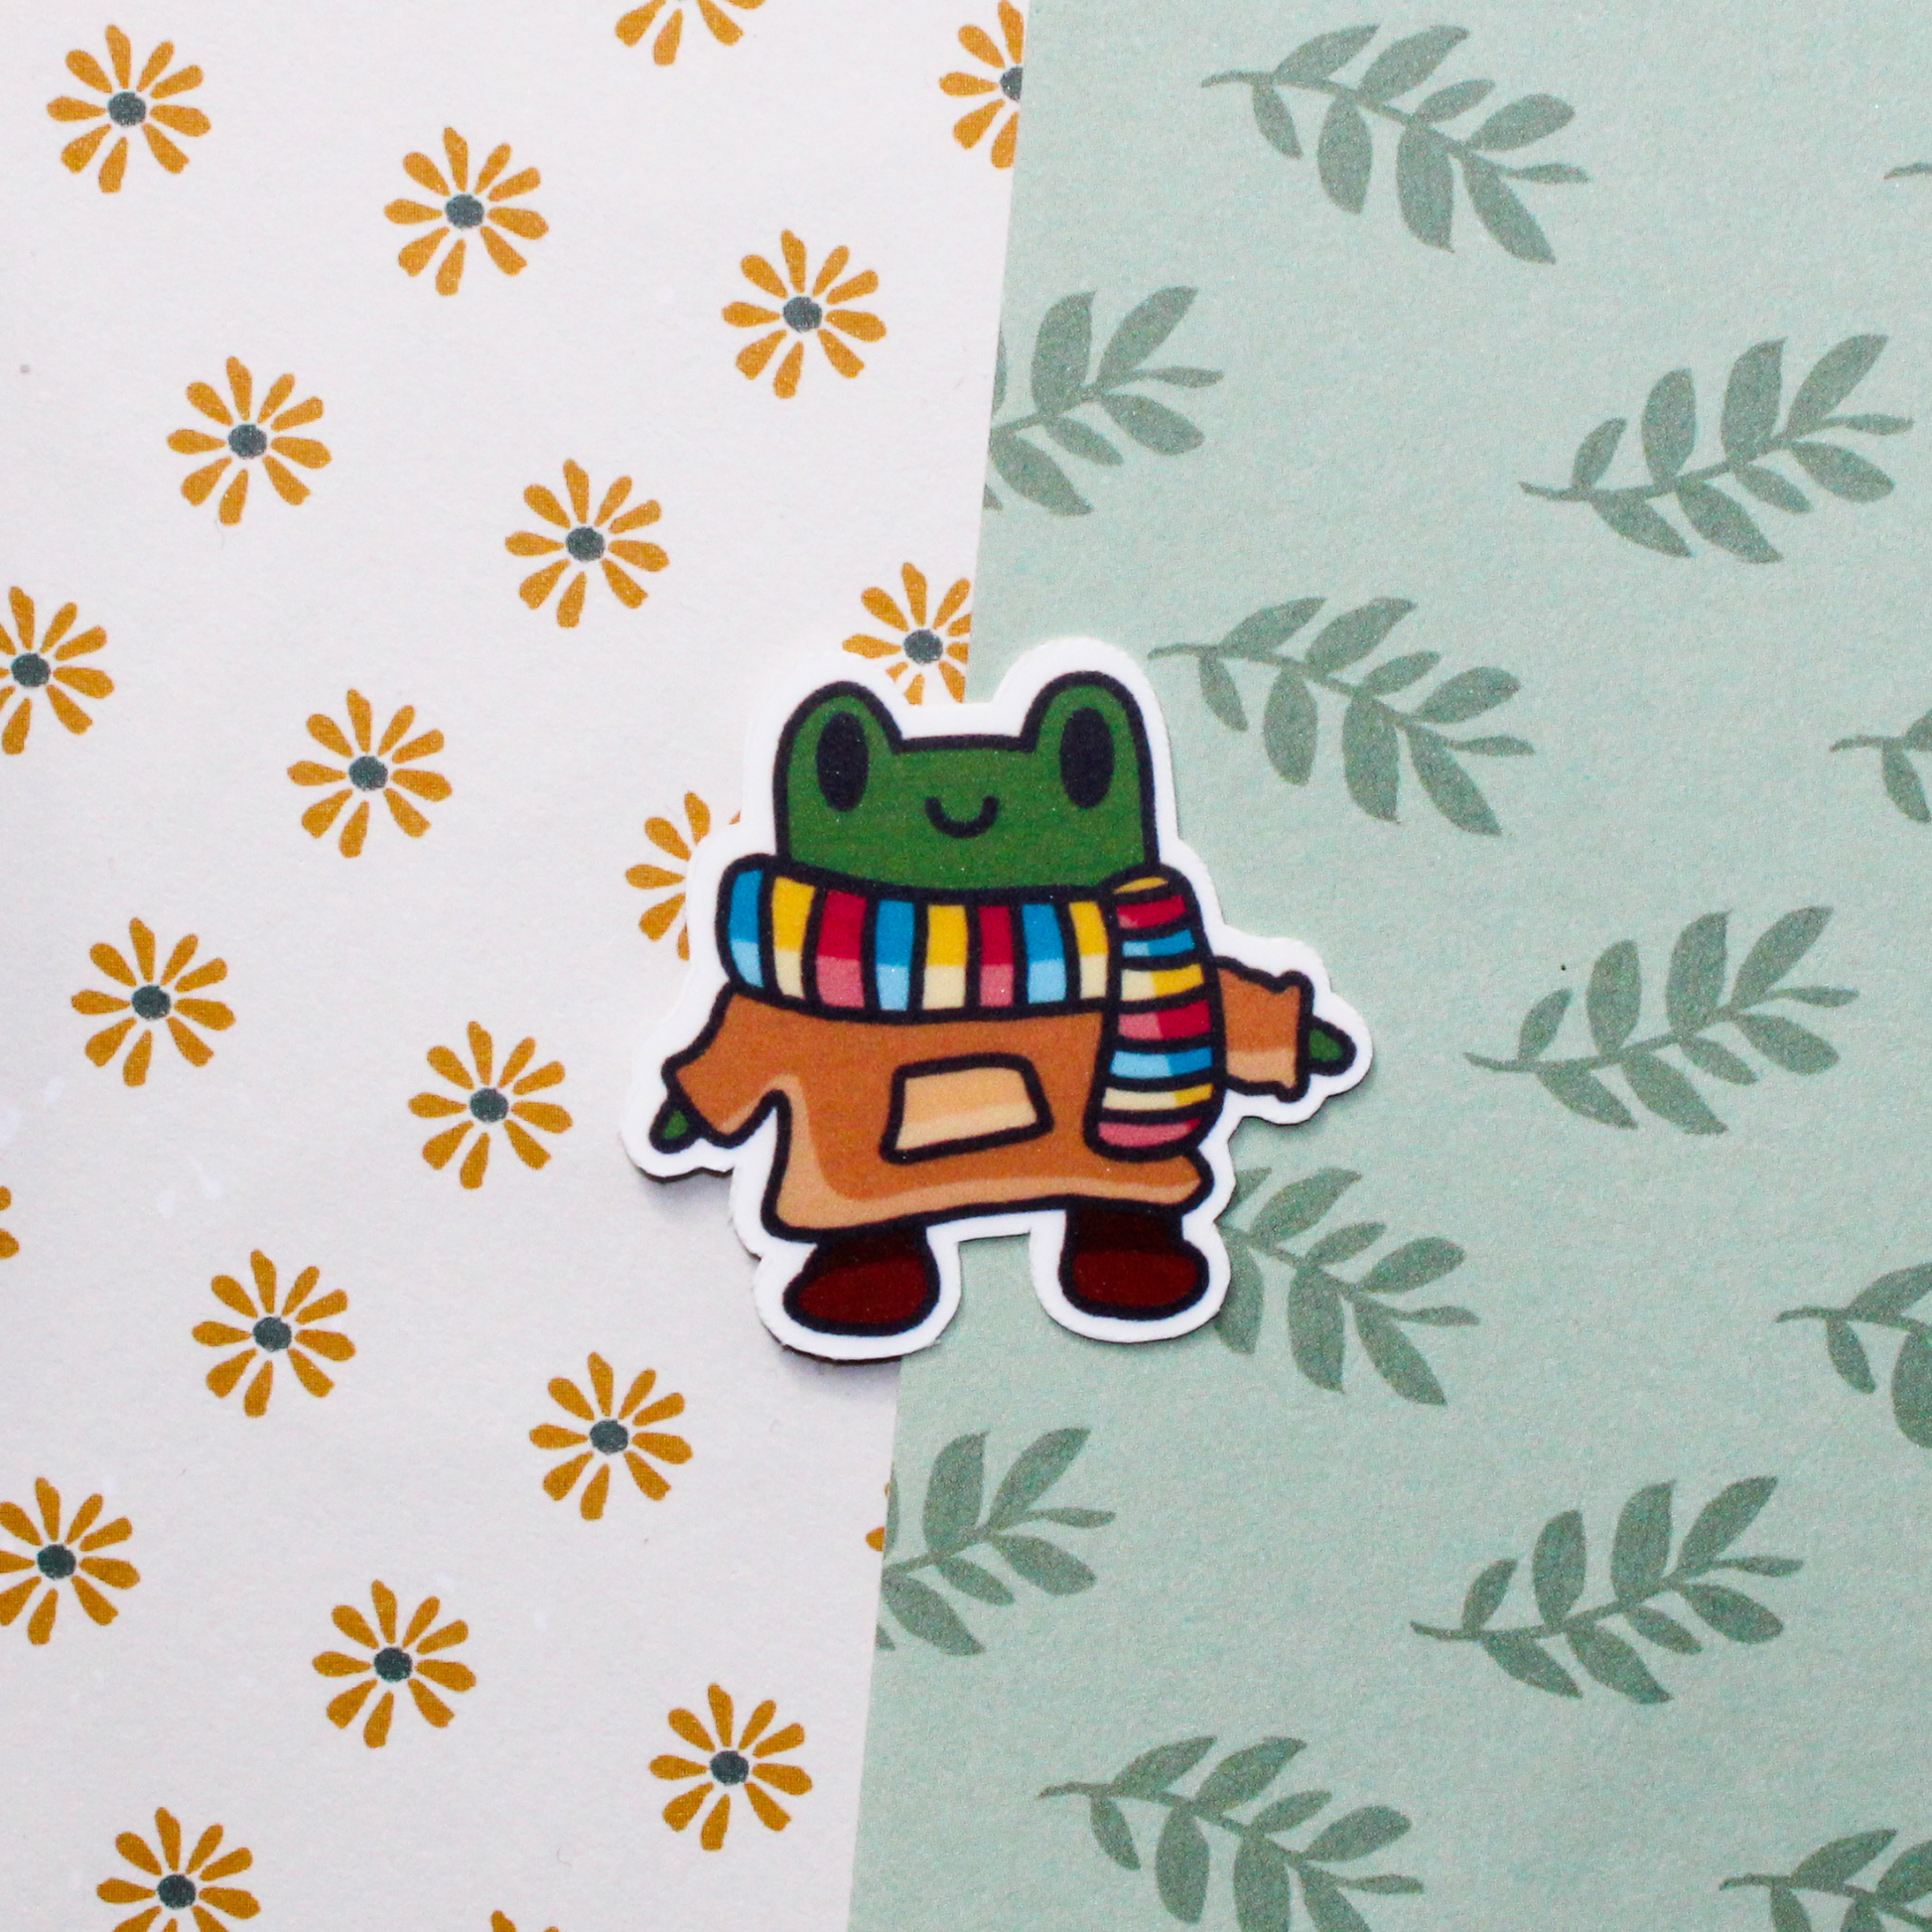 A smiling cartoon frog with a colourful scarf and brown hoodie with brown boots. Background is a flower and leaf pattern.